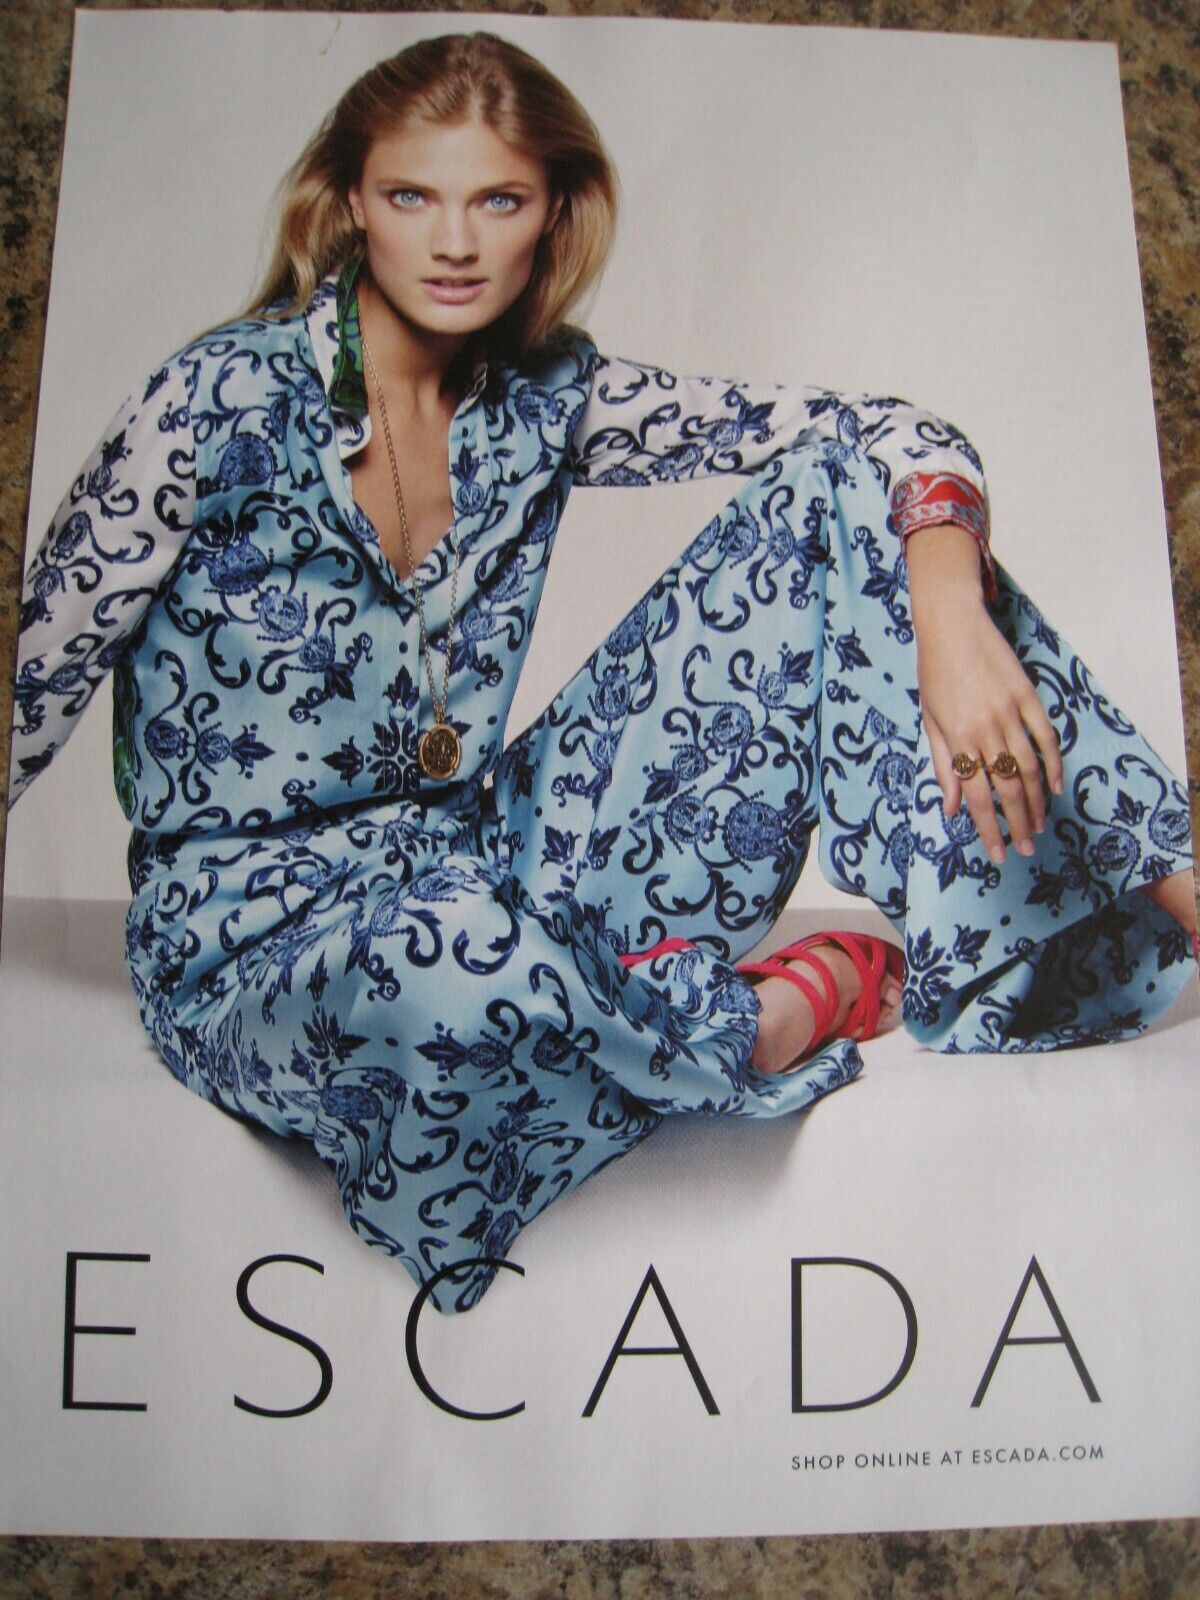 ESCADA ONLINE FASHION DESIGN IMAGE POSTER ADVERT APPROX A4 SIZE FILE 3